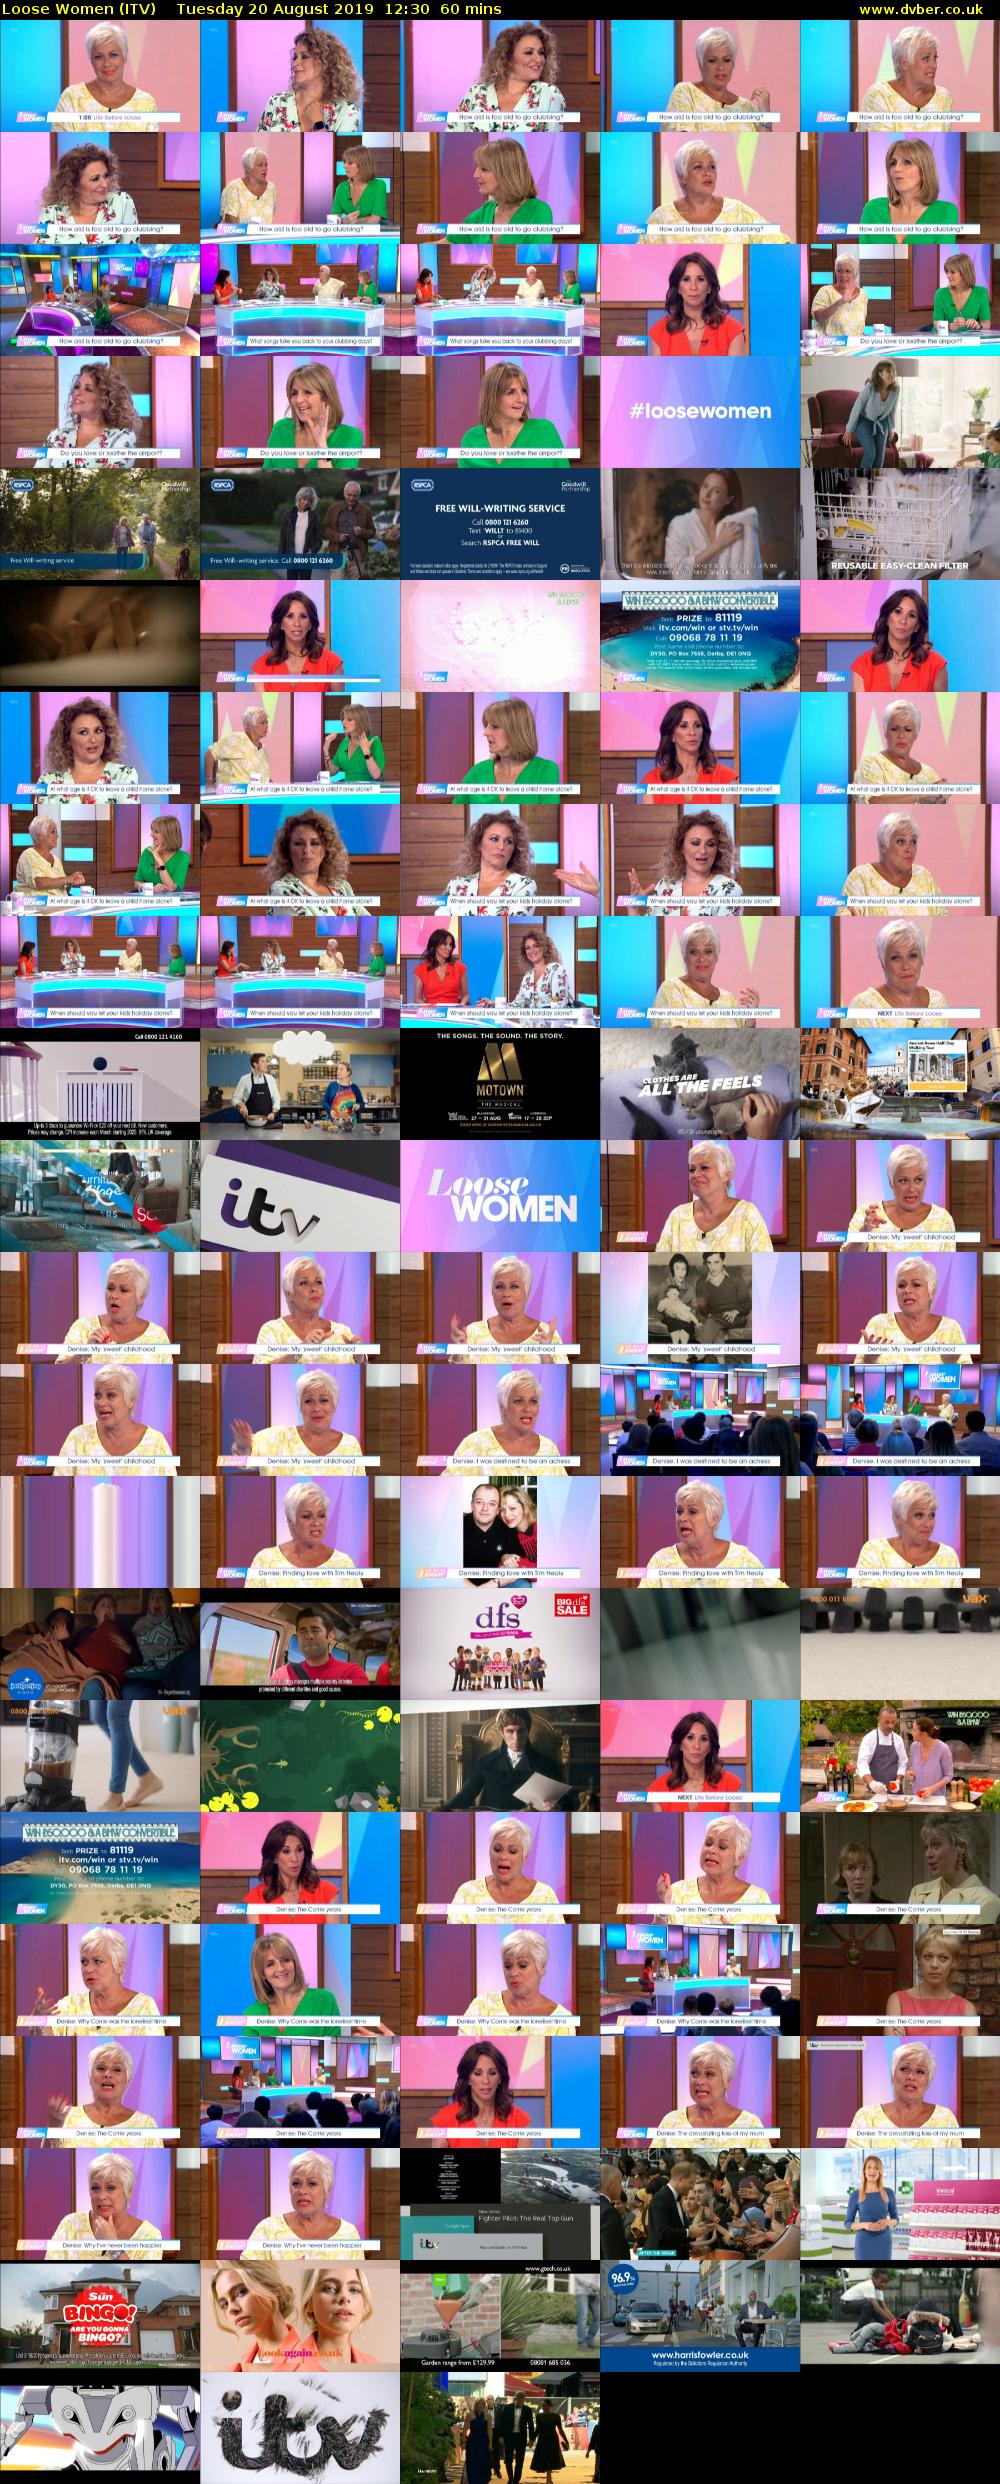 Loose Women (ITV) Tuesday 20 August 2019 12:30 - 13:30